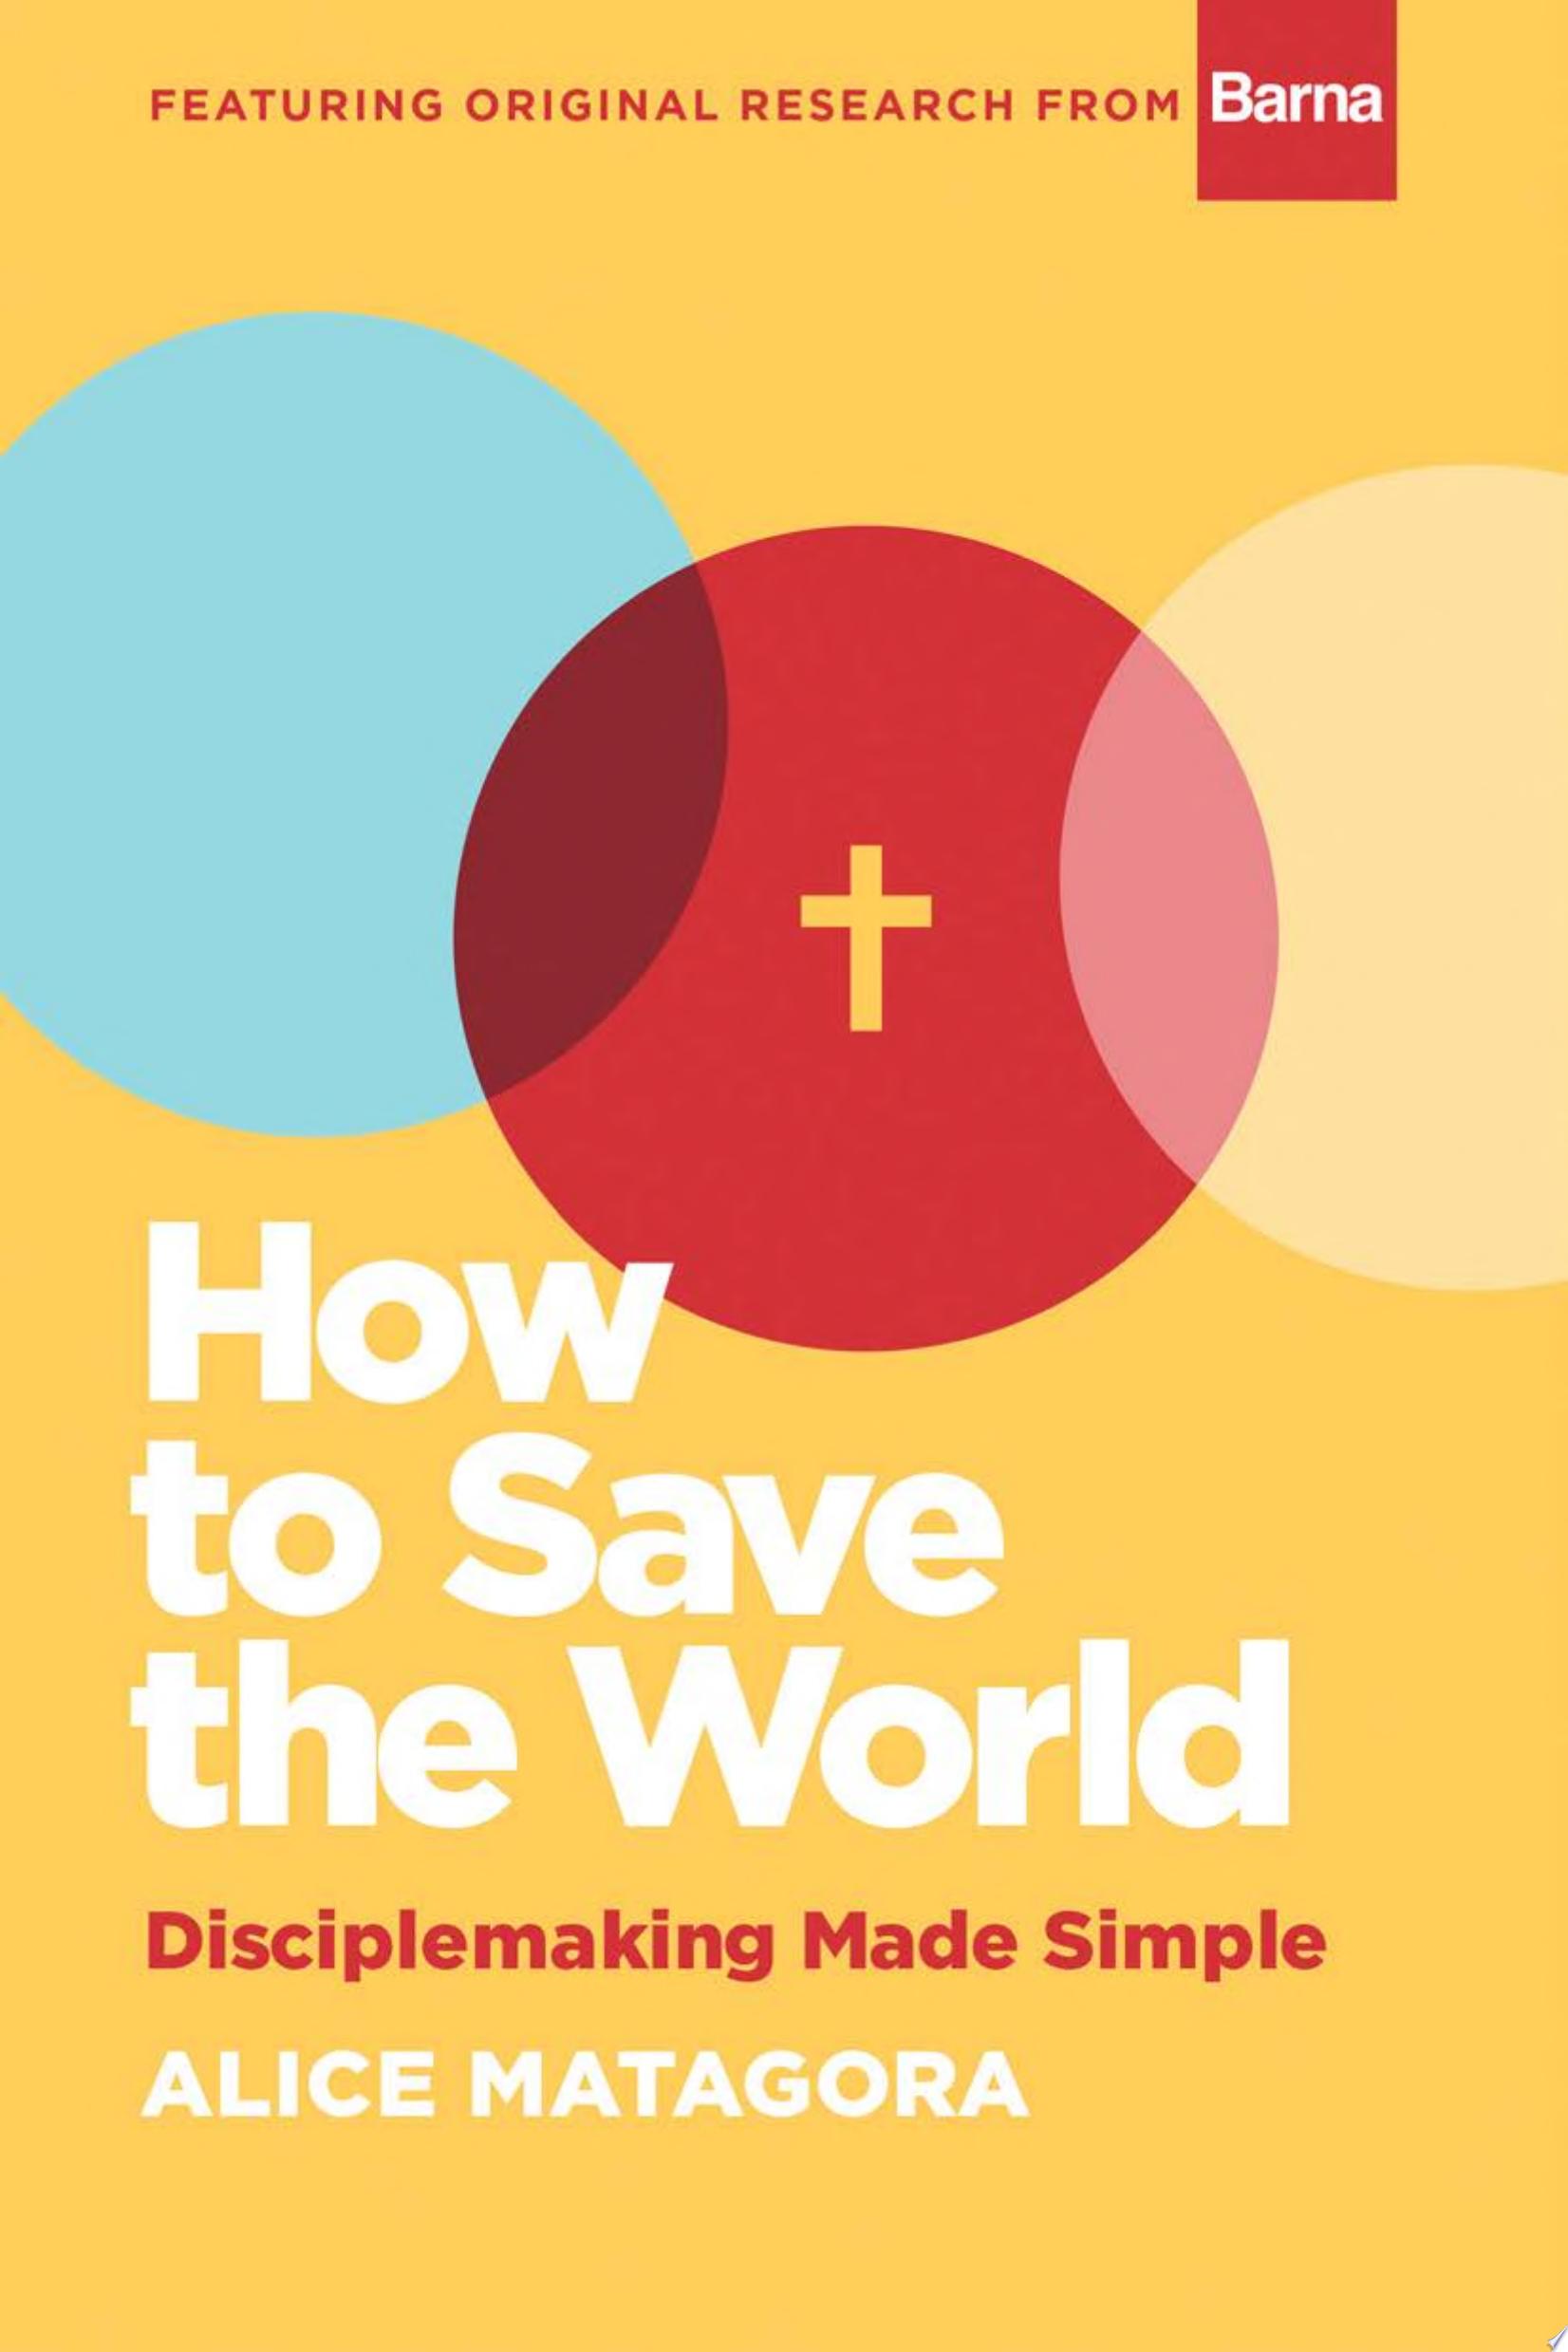 Image for "How to Save the World"